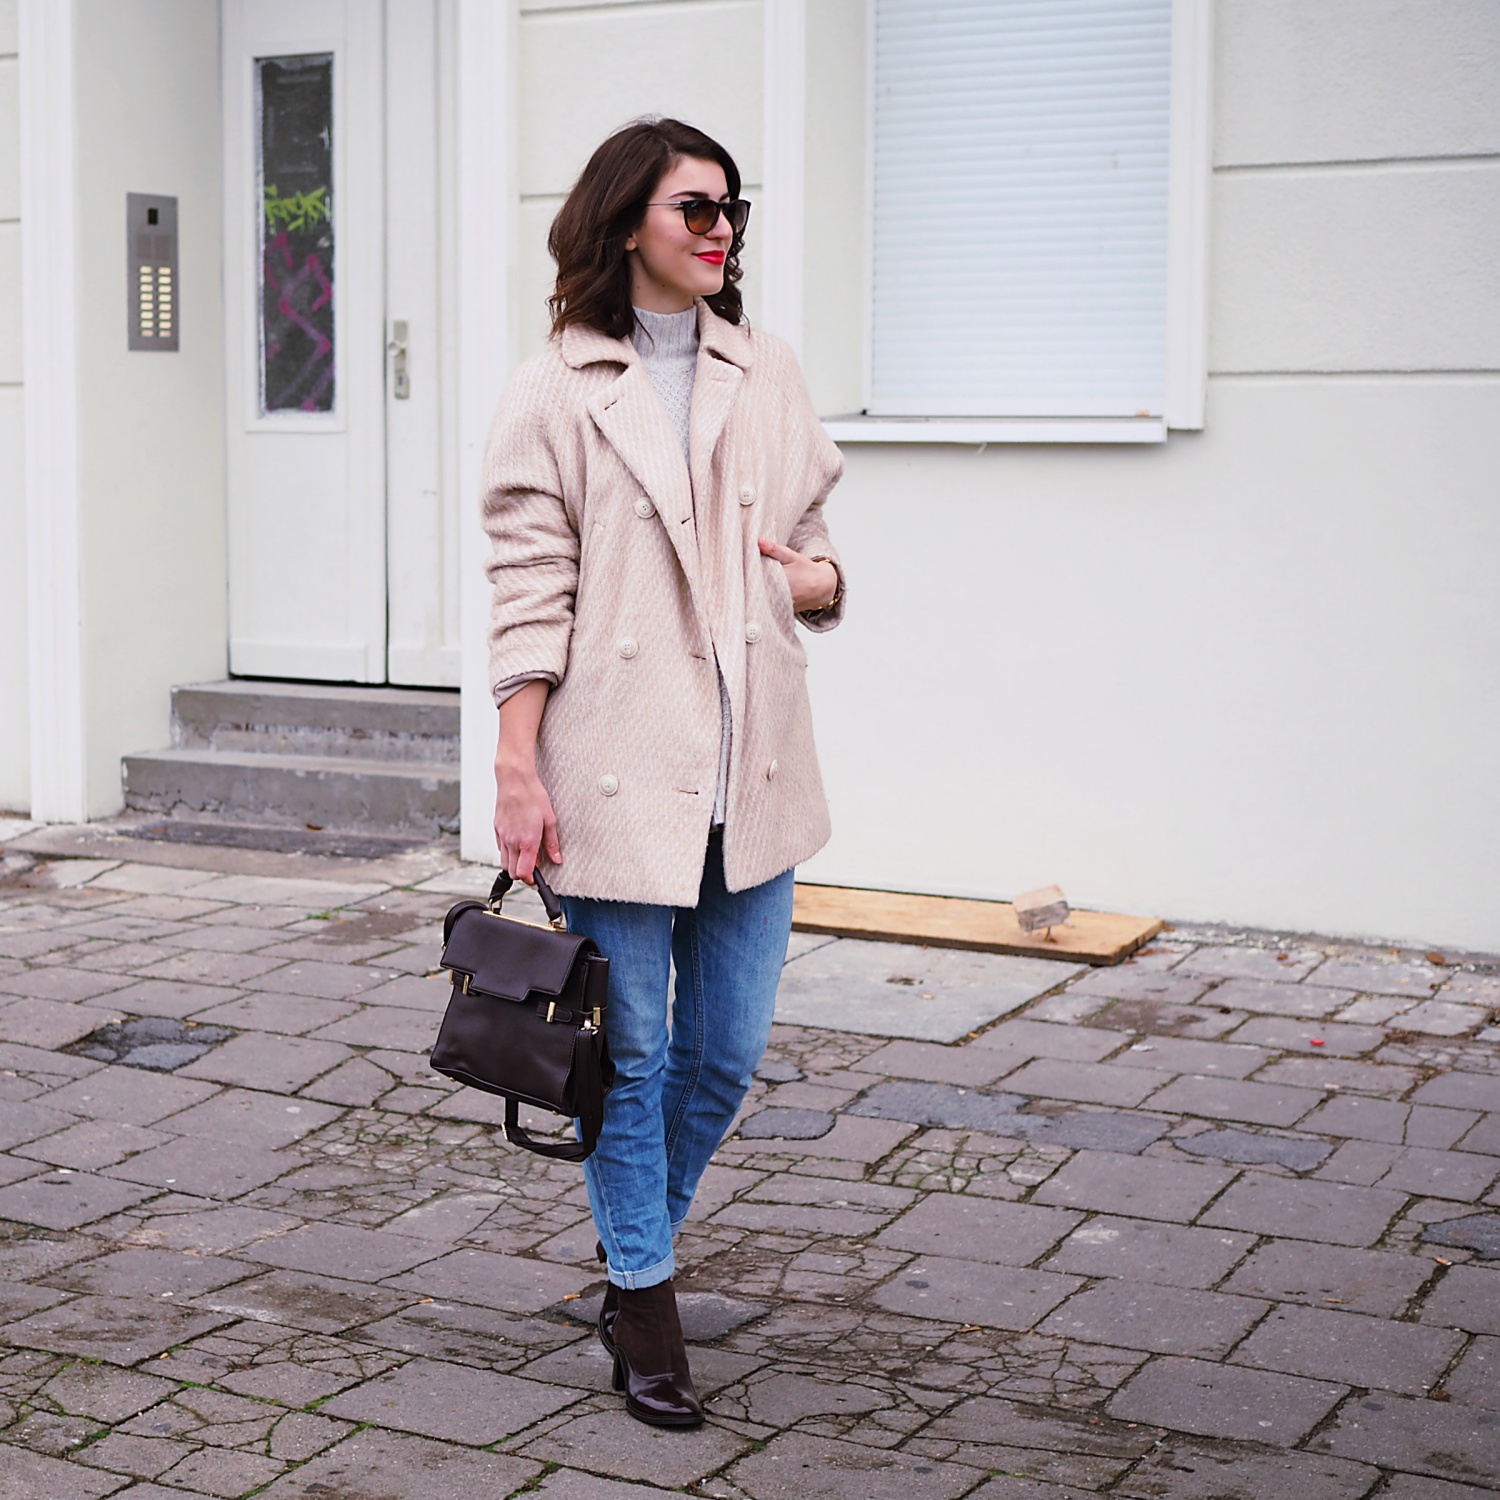 winter look blush brown neutrals streetstyle berlin samieze blog boyfriend jeans suede boots ray ban erika sunglasses asos coat oversize turtleneck sweater knitted h&m peperosa style trend how to wear